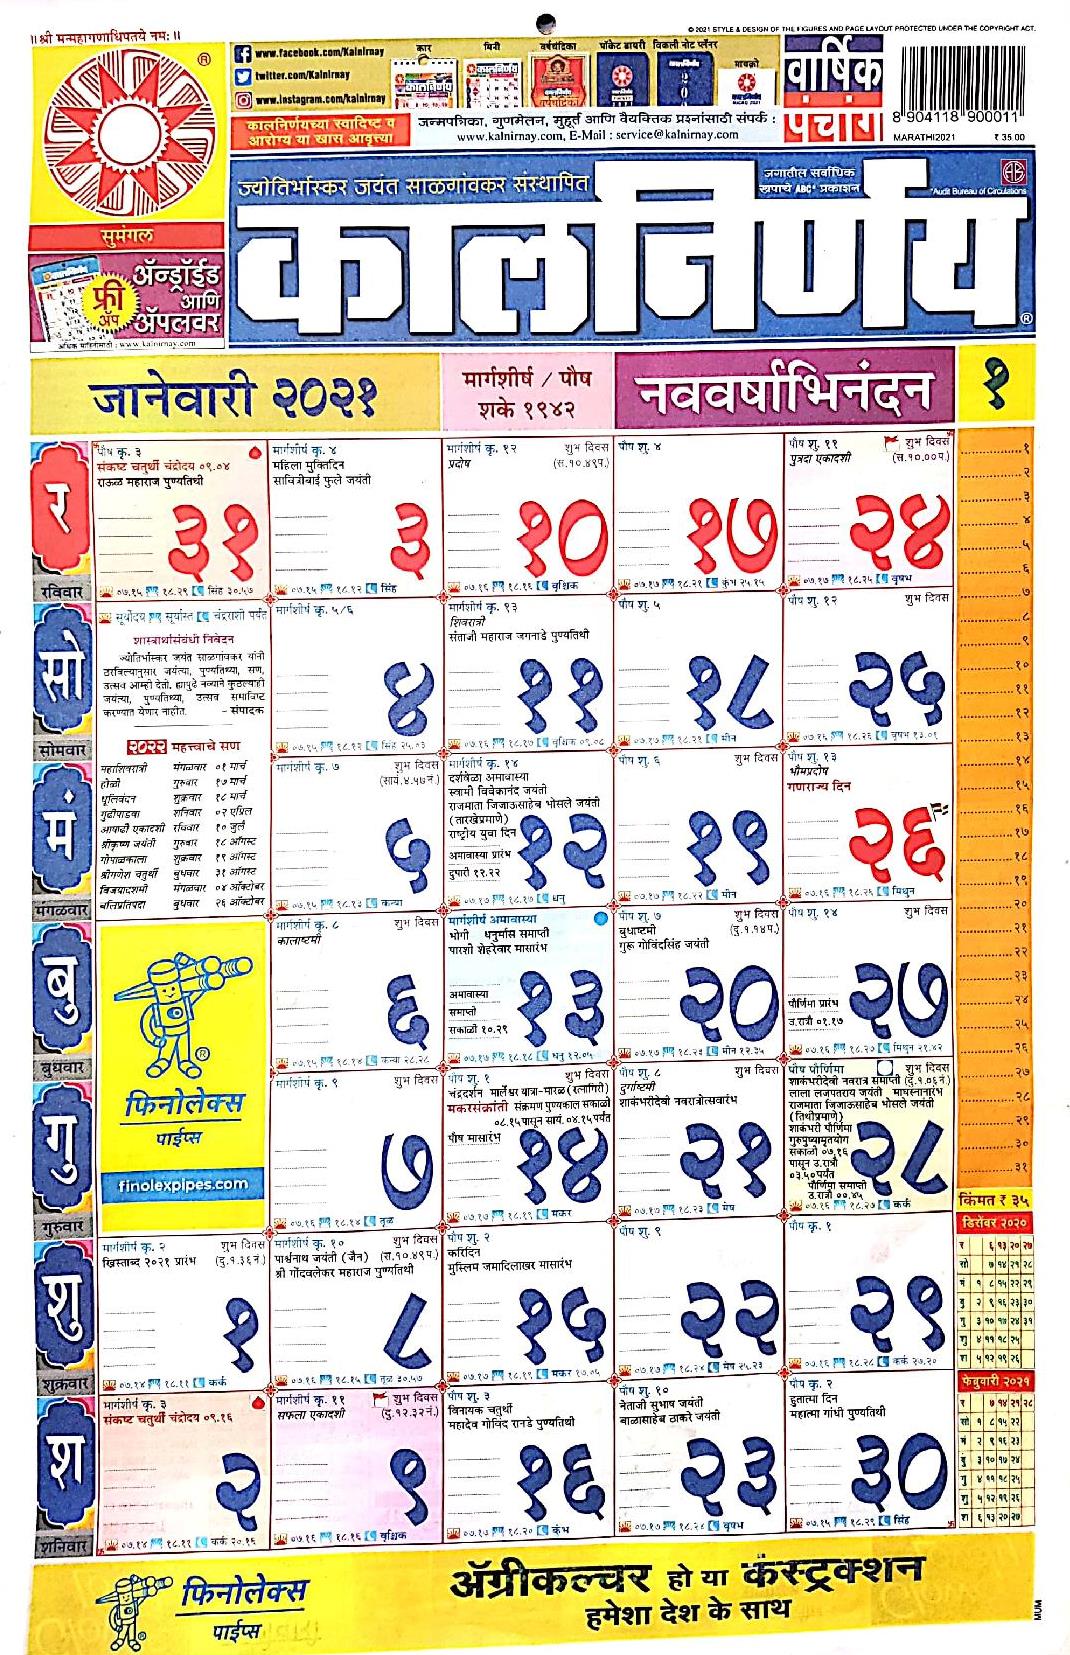 Holidays Downloadable Kalnirnay 2021 Marathi Calendar Pdf Free Printable 2020 Calendars With Holidays Pleasant To This Template Is Without Holidays Cathern Kisner